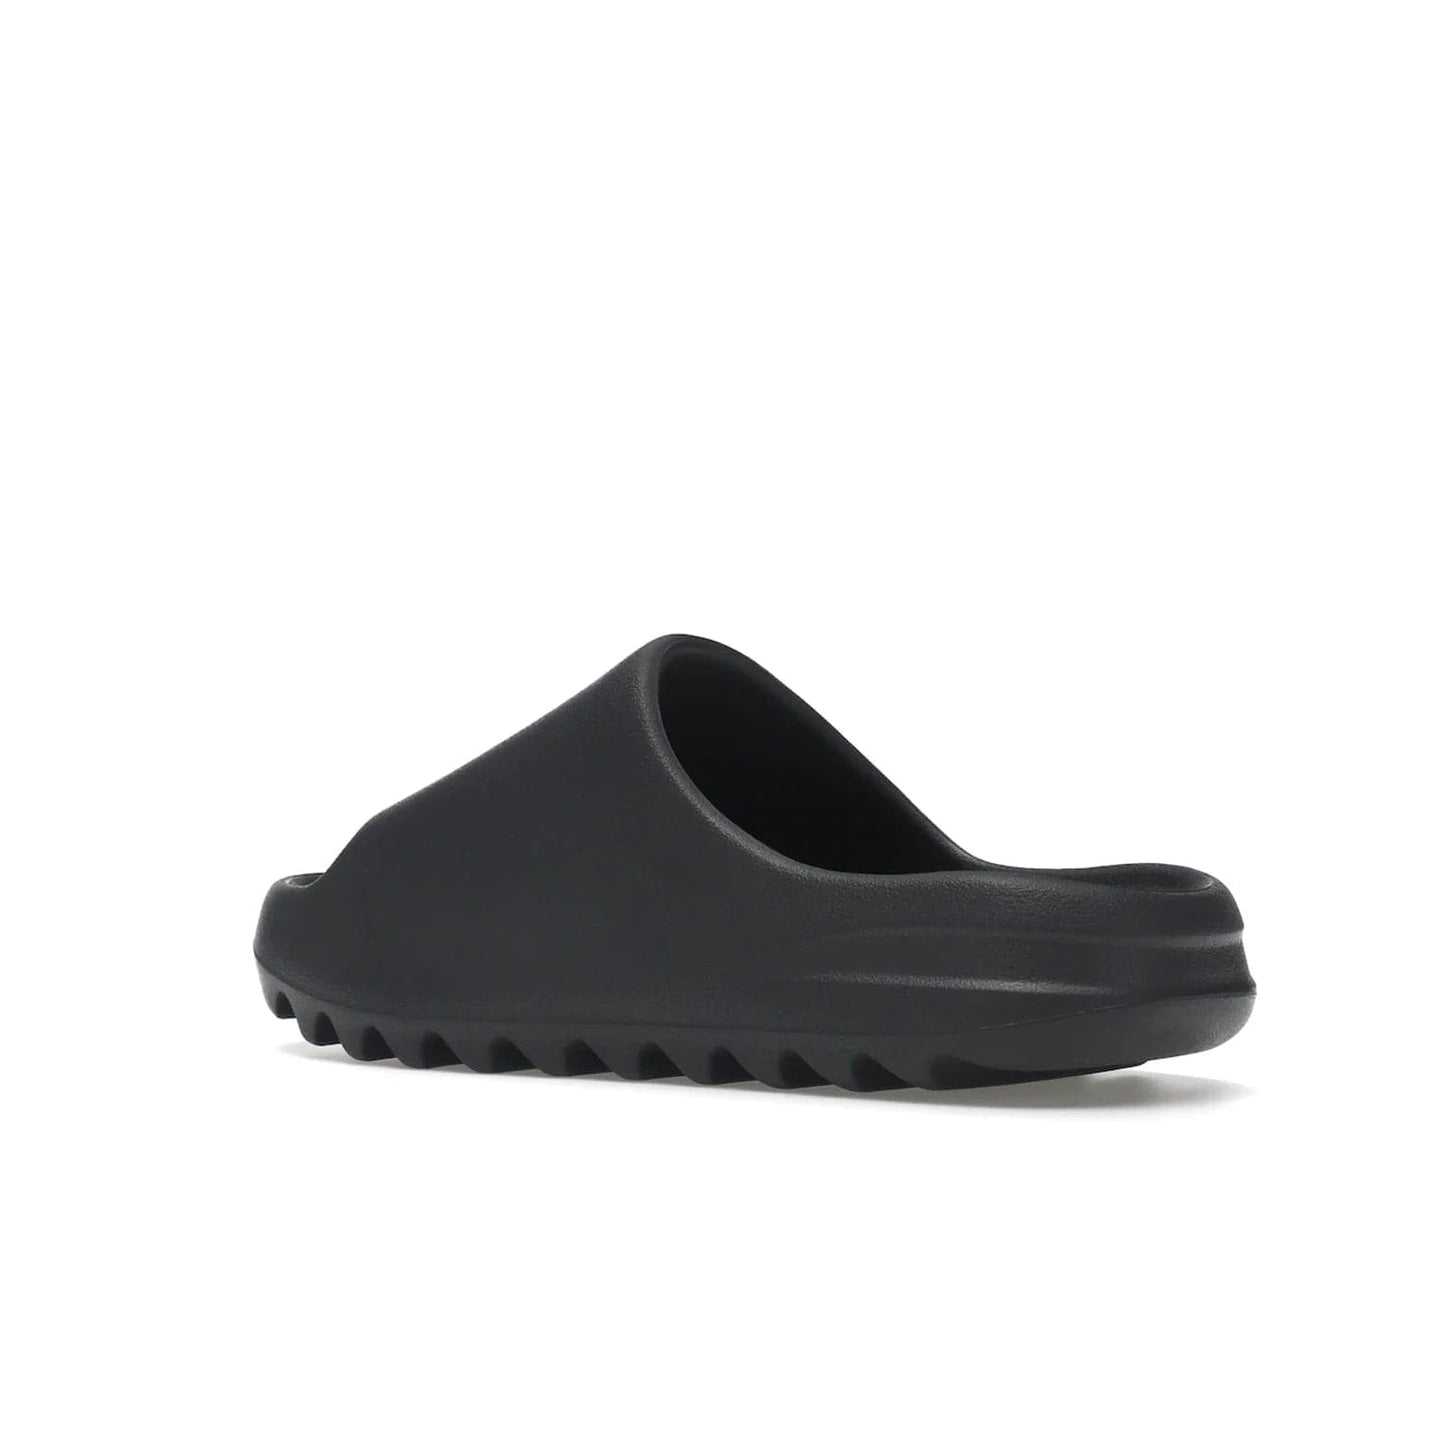 adidas Yeezy Slide Slate Grey - Image 23 - Only at www.BallersClubKickz.com - Stylish & comfortable adidas Yeezy Slide Slate Grey features an EVA foam upper, strategic cutouts, textured outsole pattern, & easy slip-on design for modern comfort & classic style.